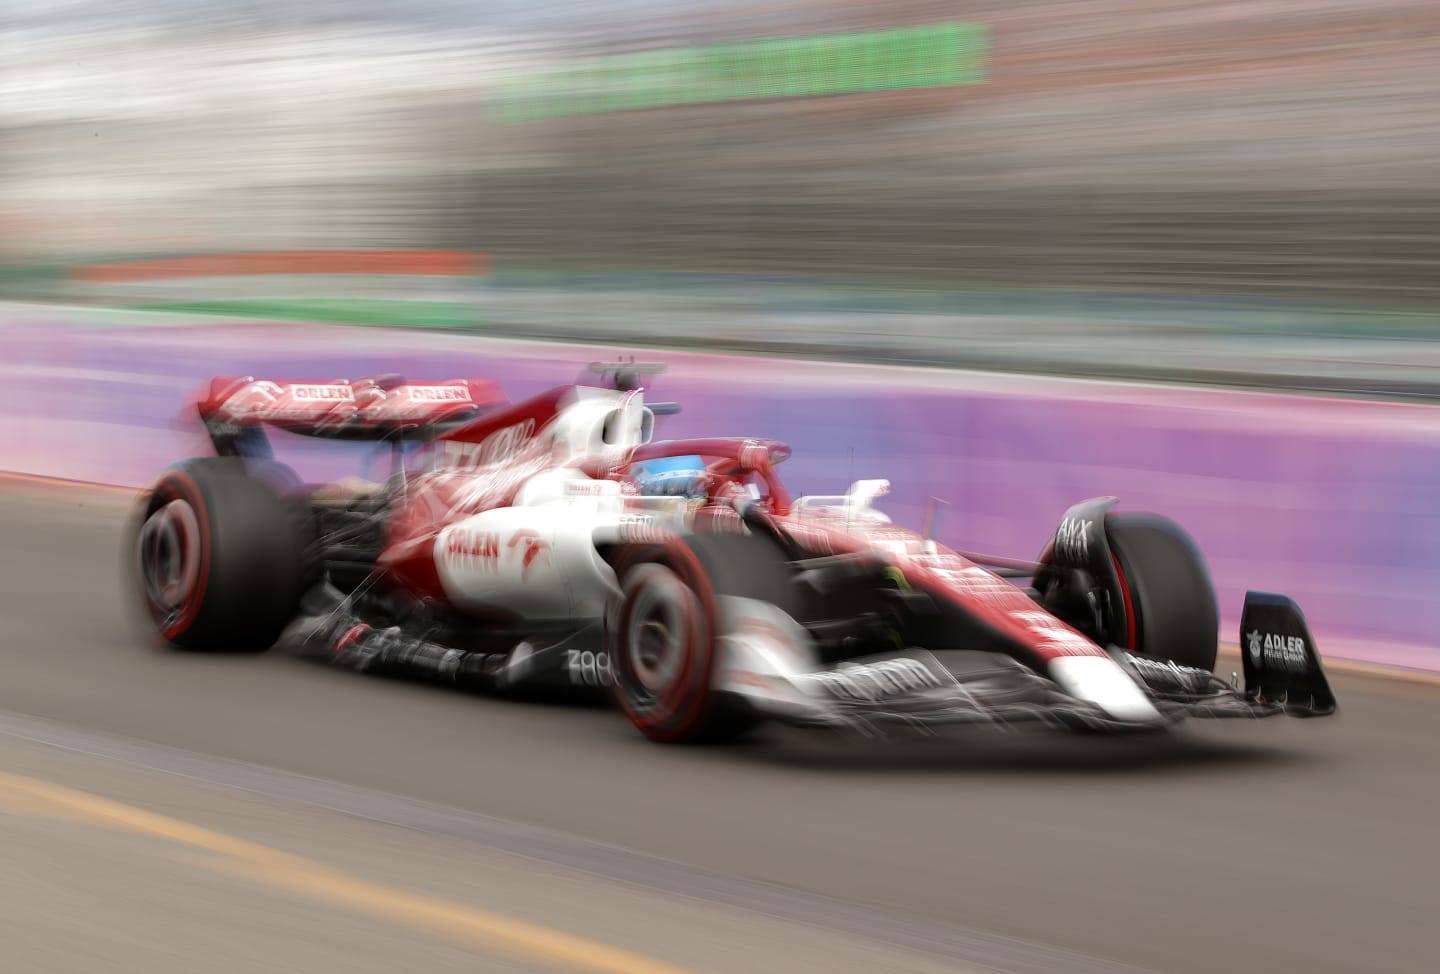 MELBOURNE, AUSTRALIA - APRIL 09: Valtteri Bottas of Finland driving the (77) Alfa Romeo F1 C42 Ferrari in the Pitlane during final practice ahead of the F1 Grand Prix of Australia at Melbourne Grand Prix Circuit on April 09, 2022 in Melbourne, Australia. (Photo by Robert Cianflone/Getty Images)